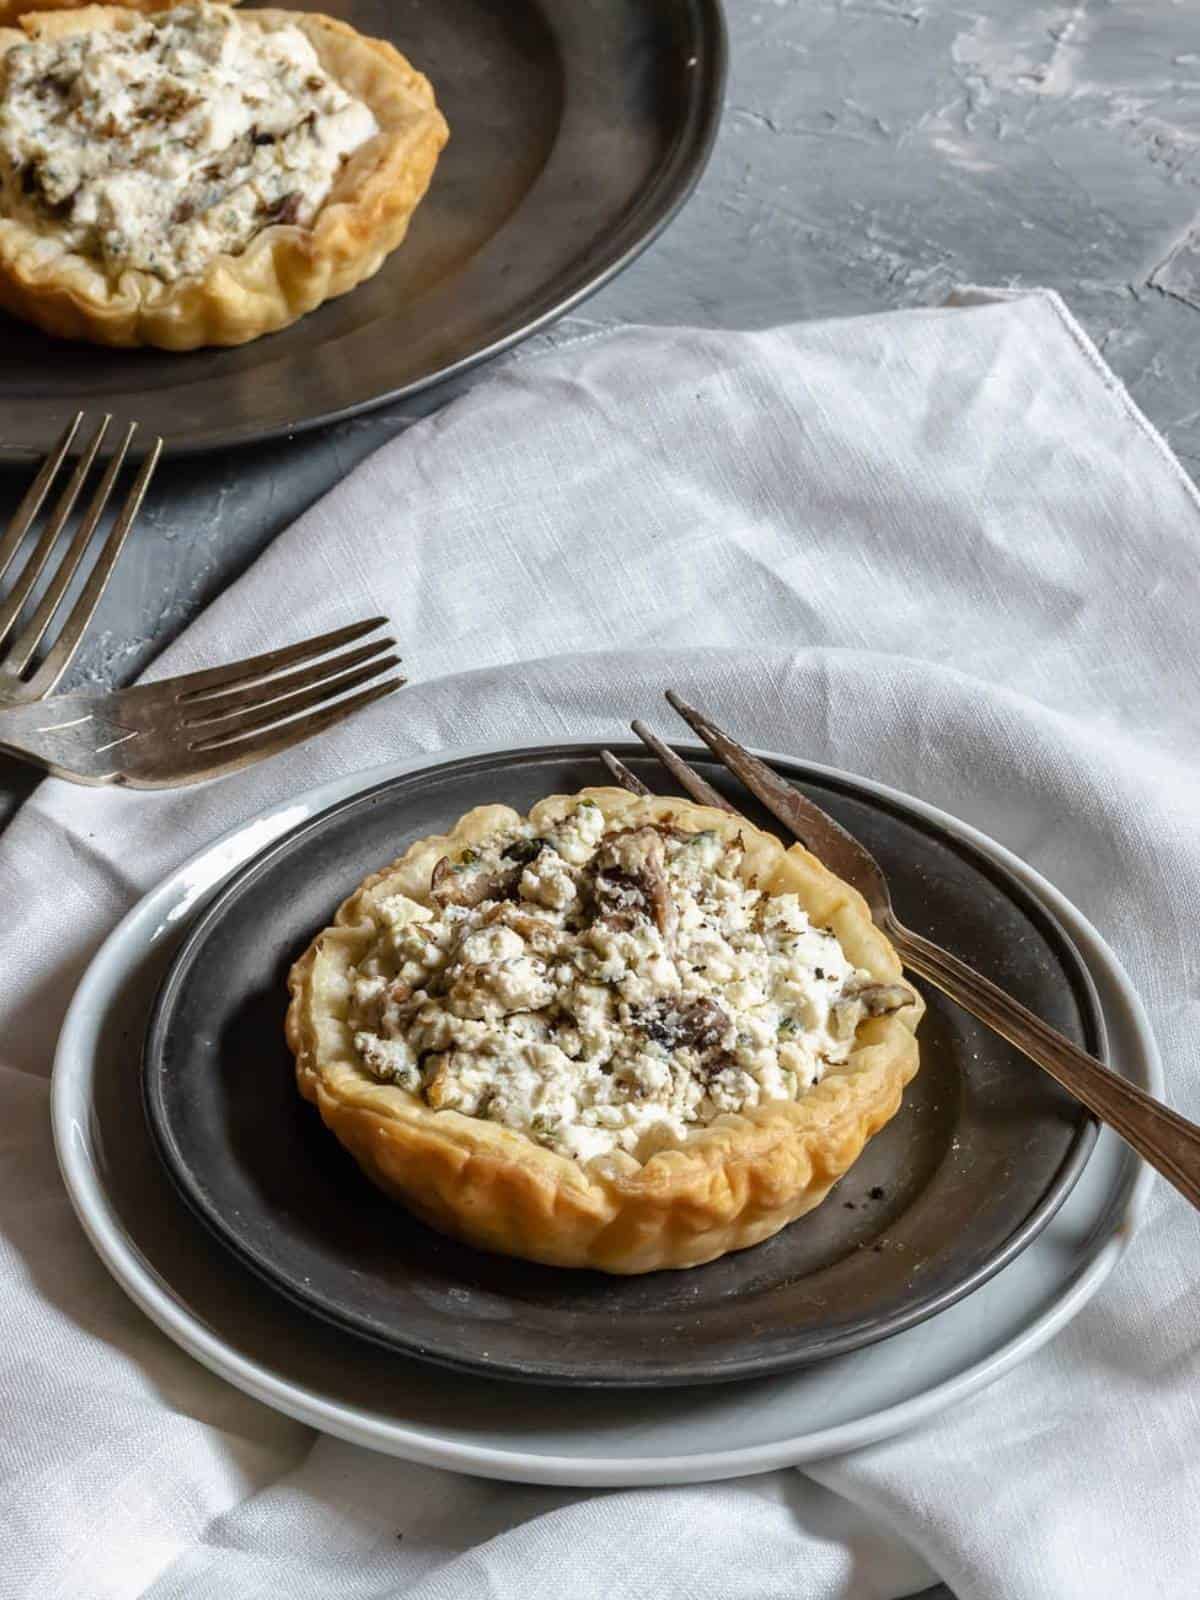 puff-pastry-tart-ricotta-and-mushrooms-truffle-on-plate-with-fork-dish-with-another-tart-in-the-background